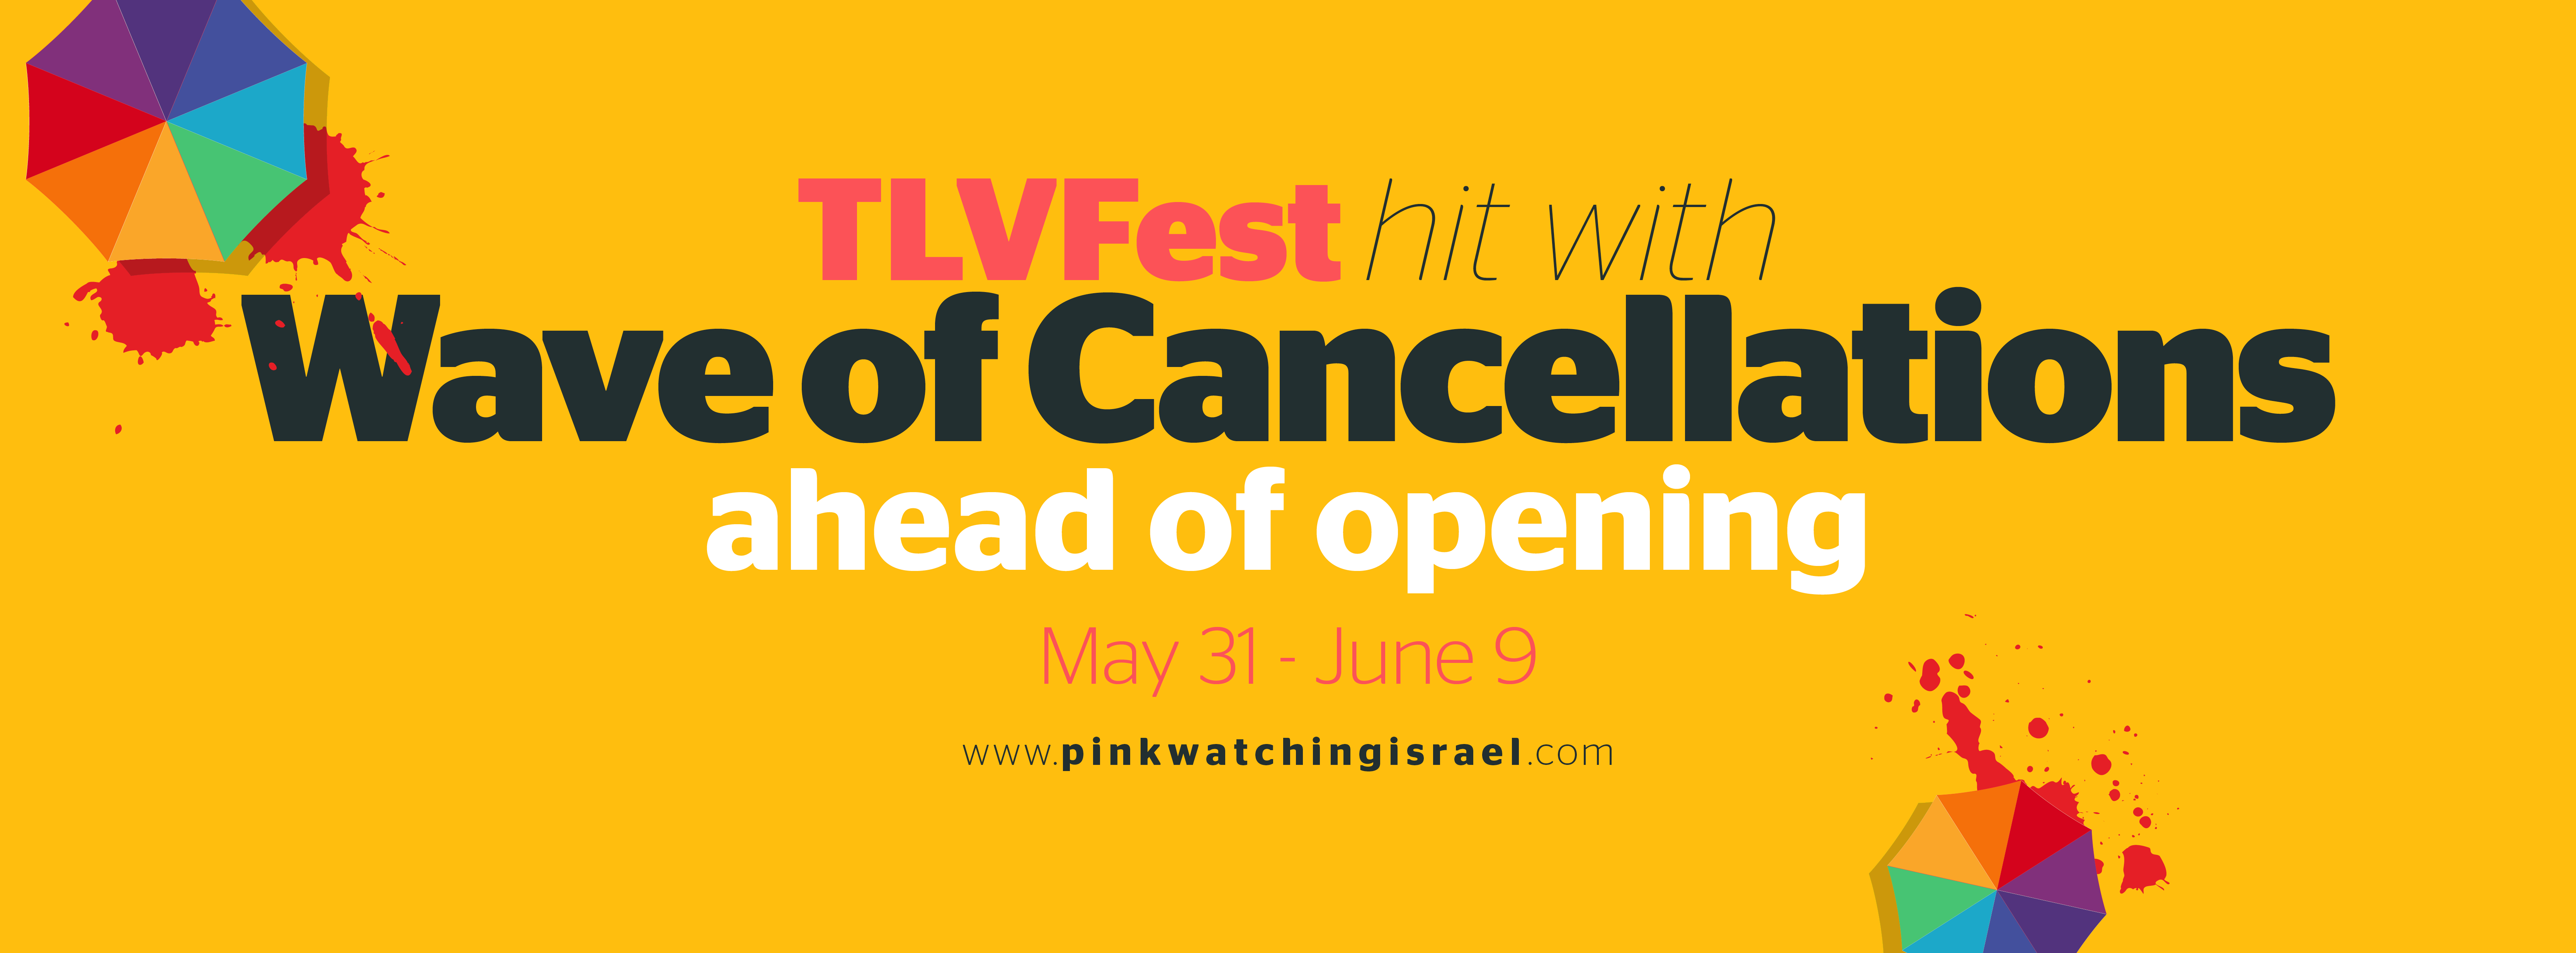 TLVFest hit with wave of cancellations ahead of opening this week